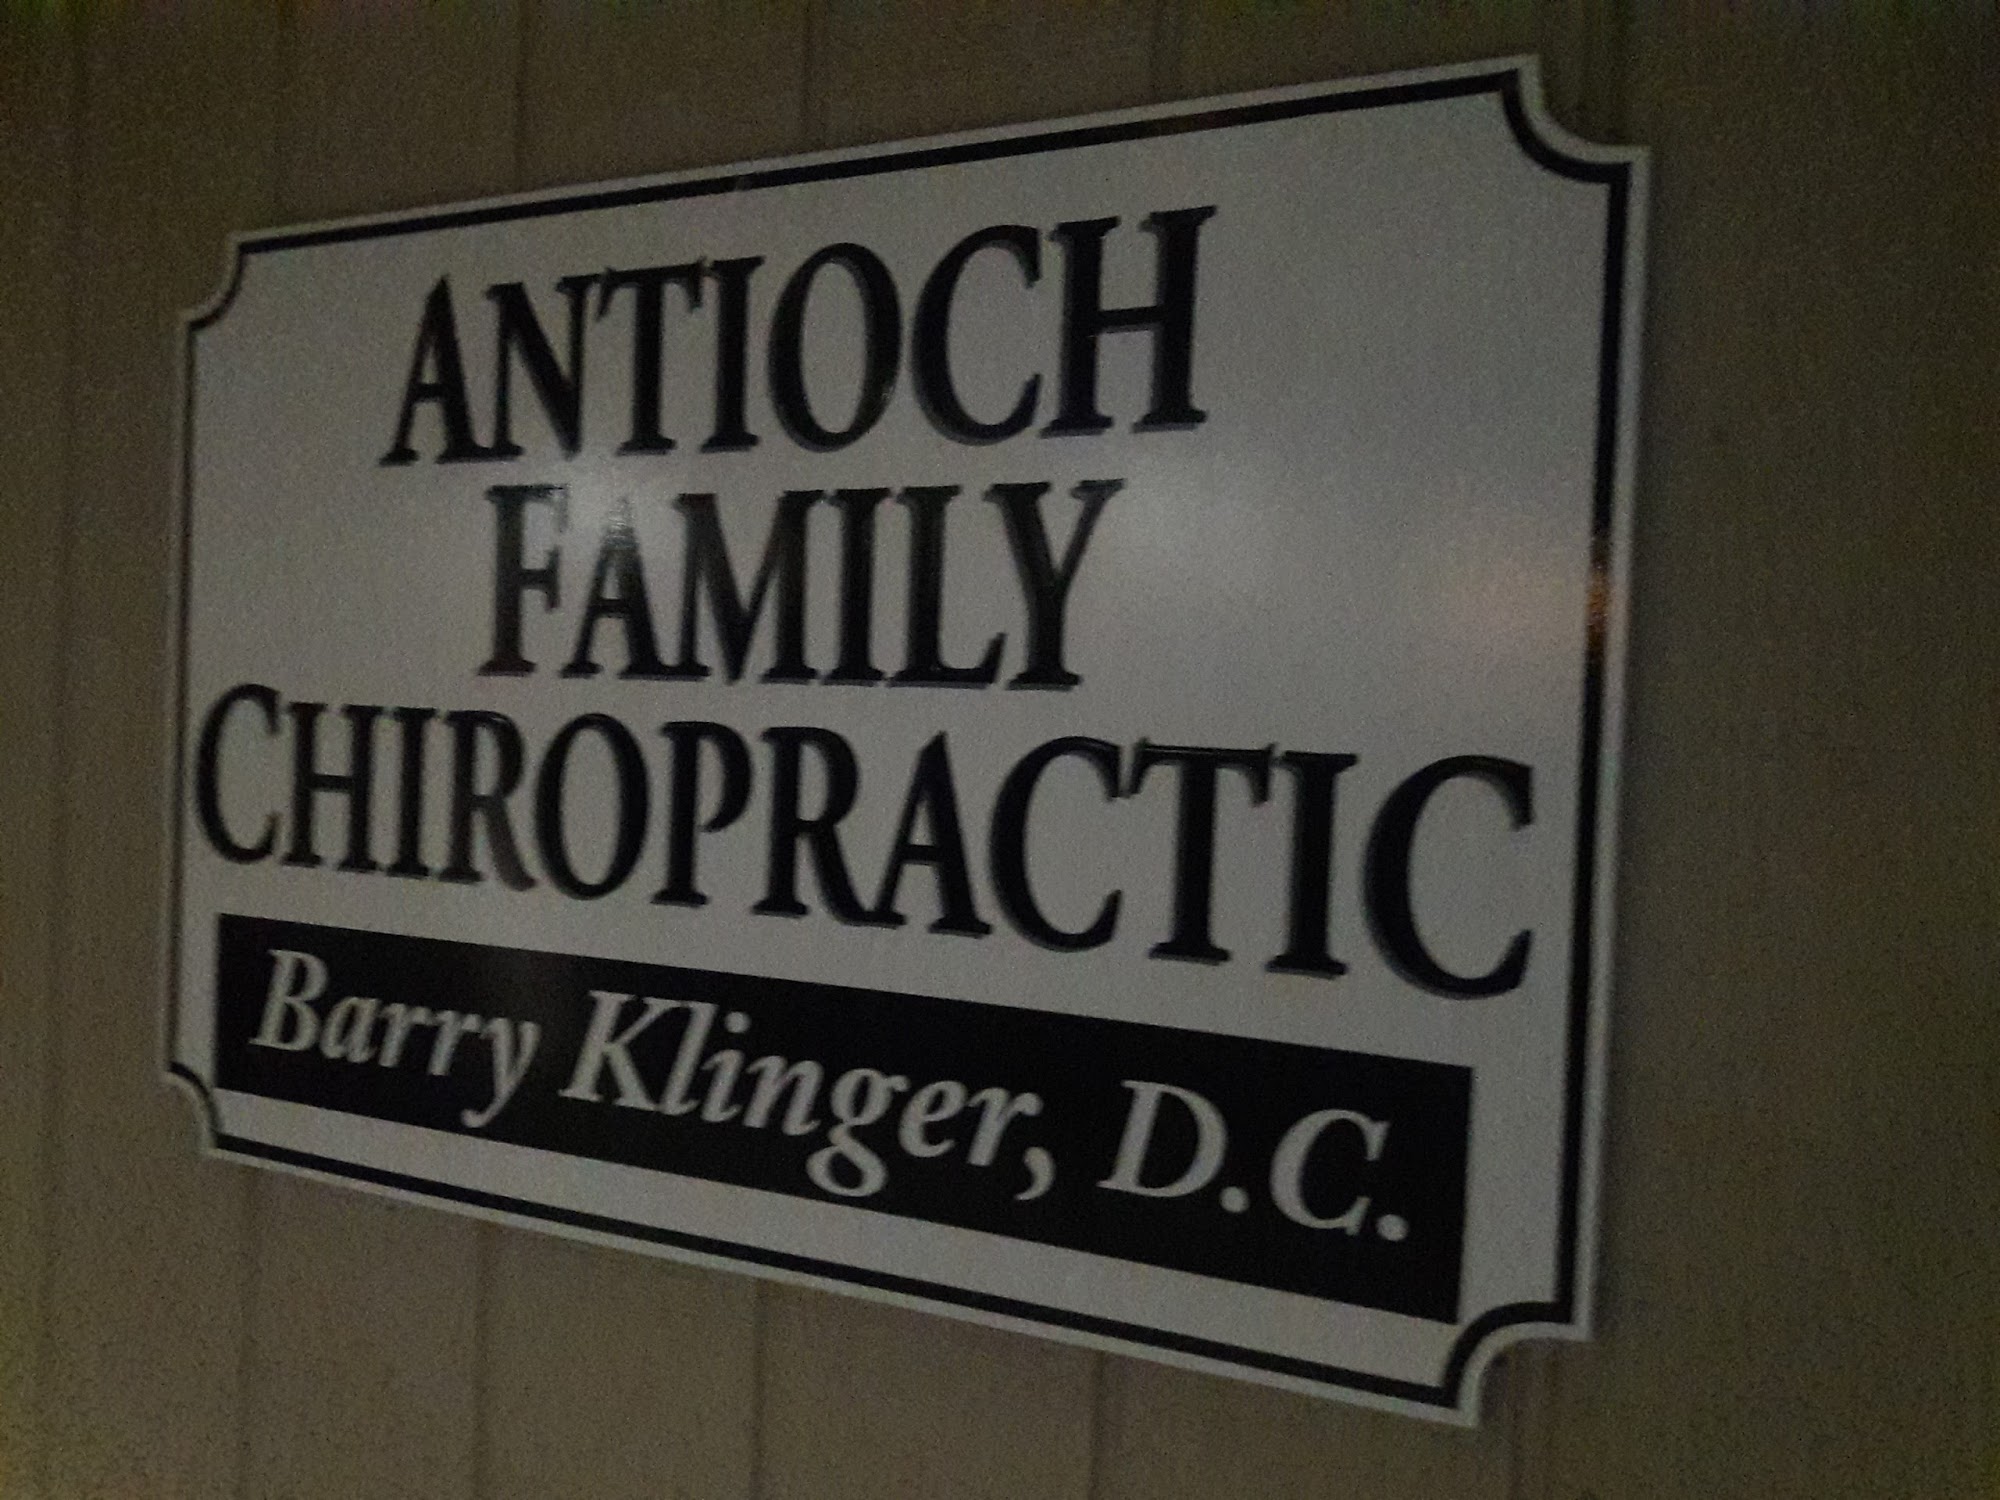 Antioch Family Chiropractic